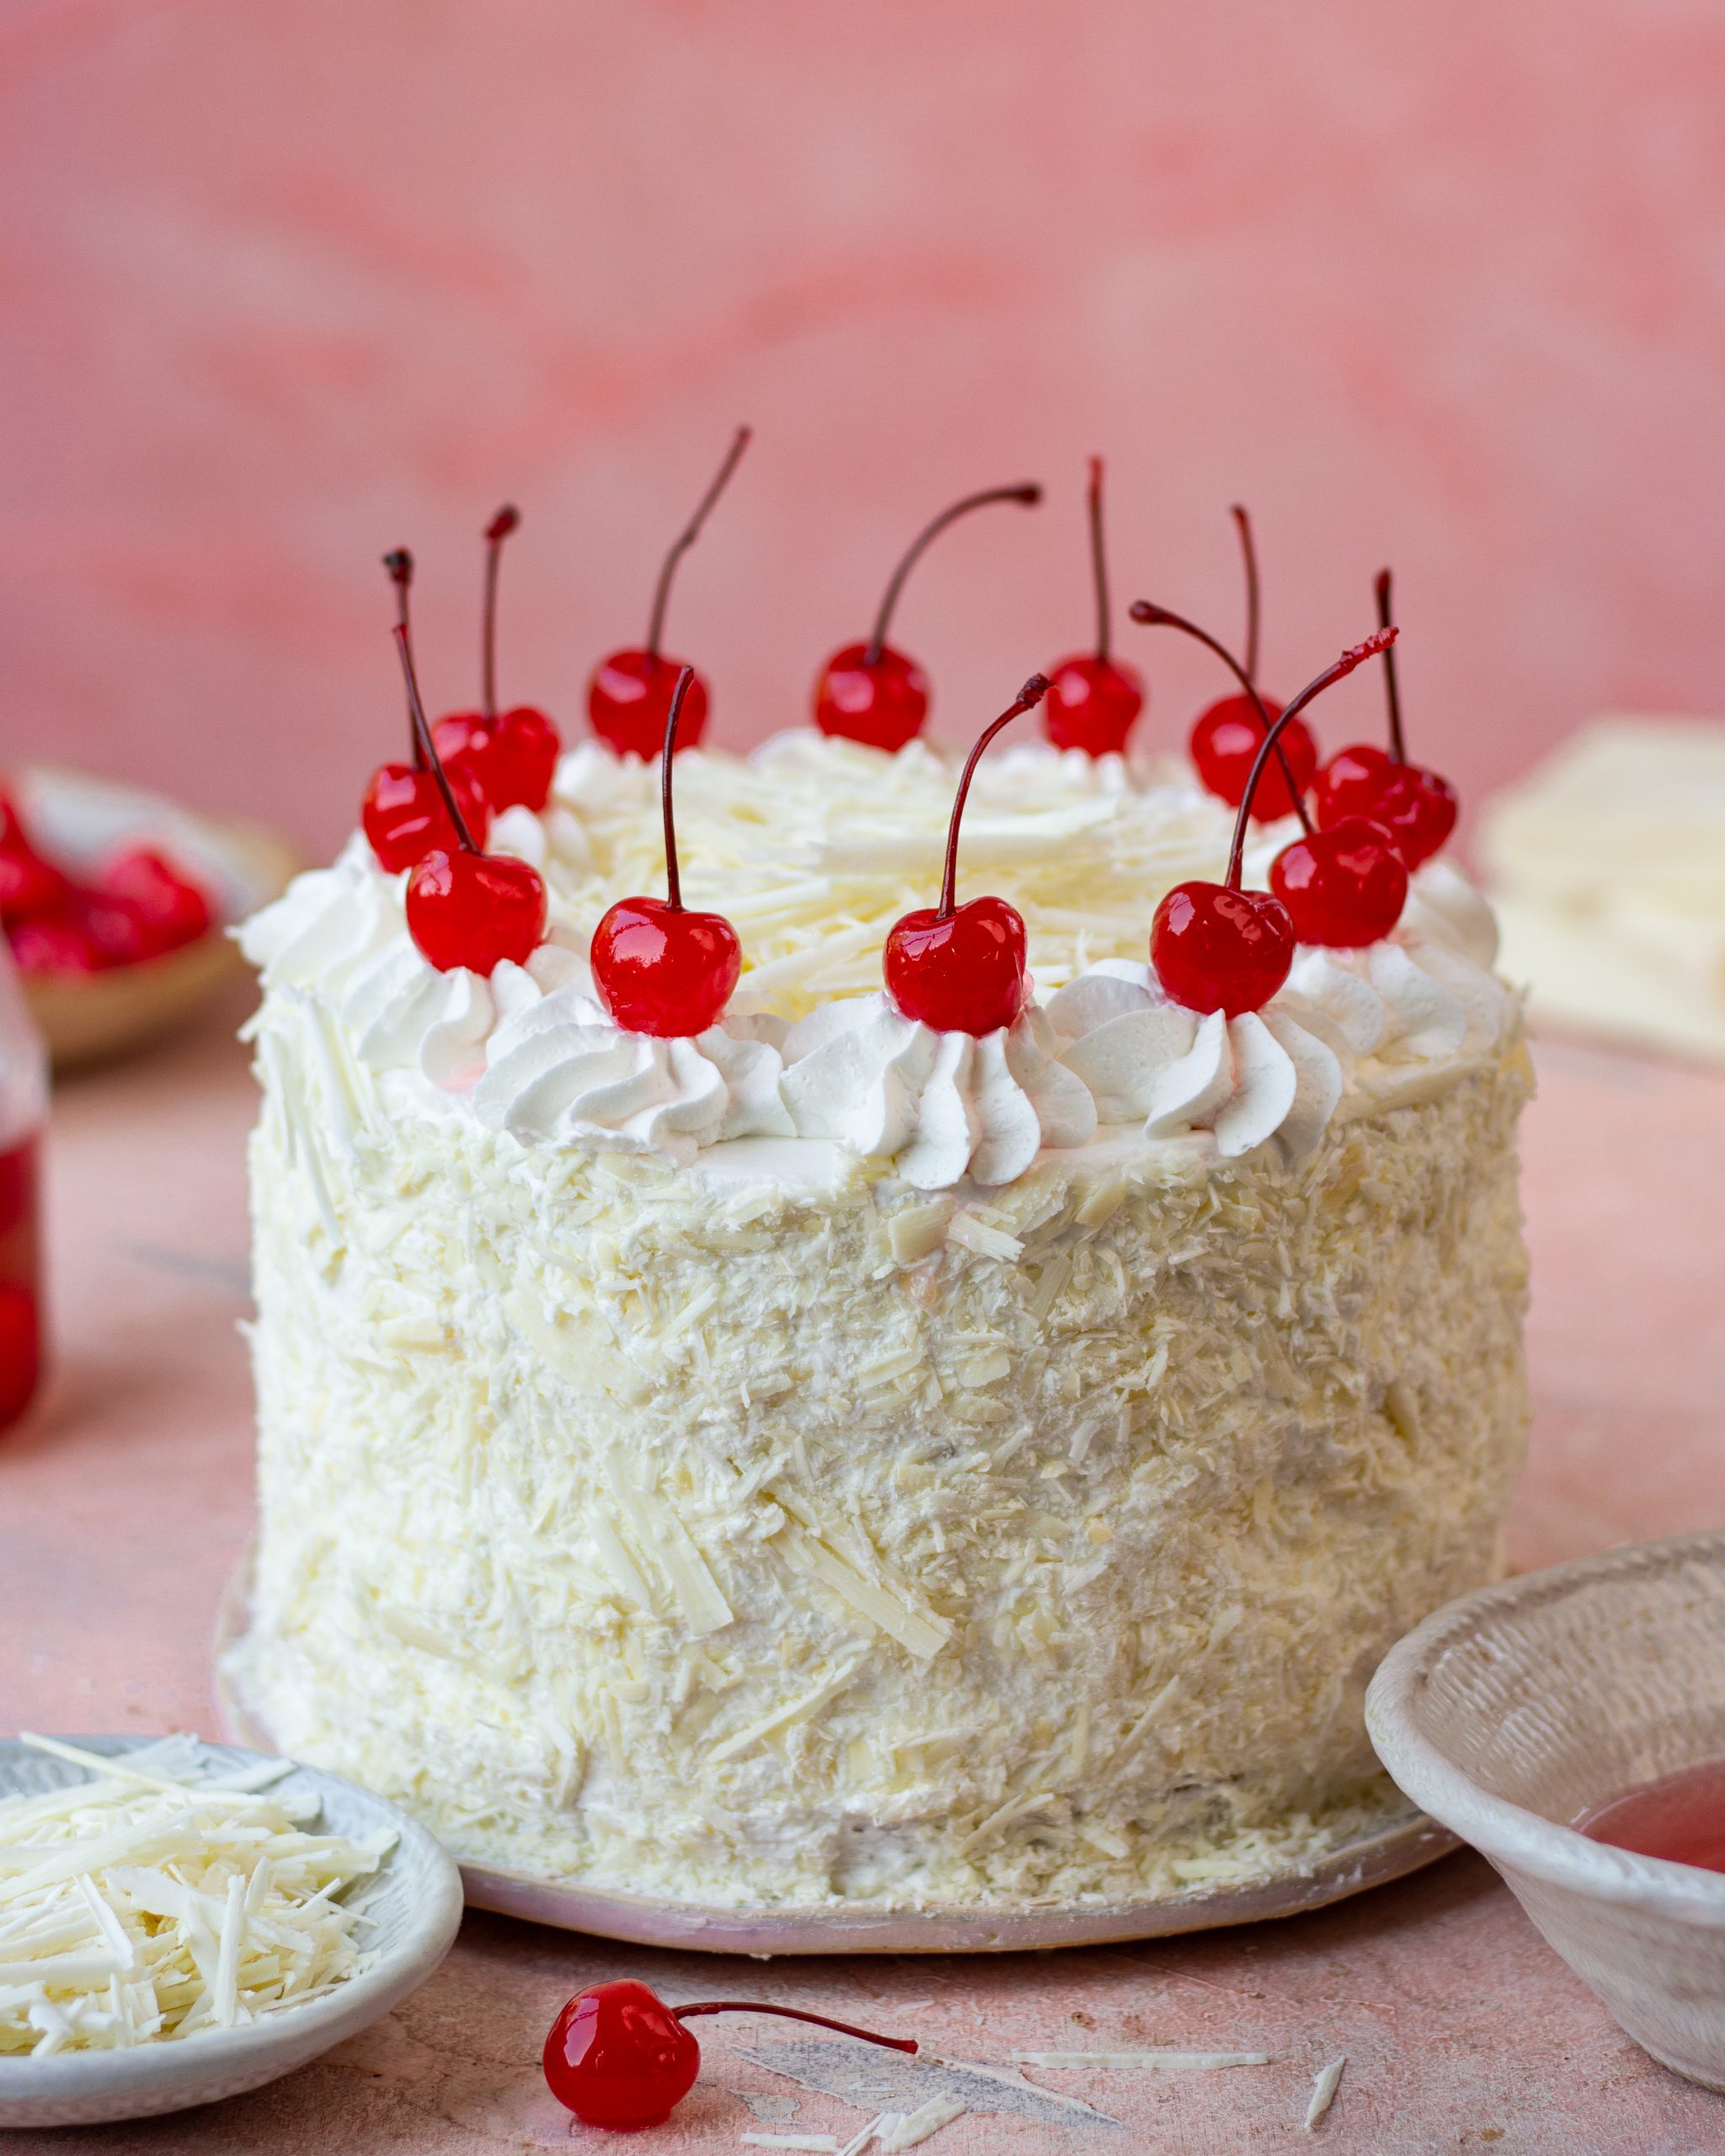 Black forest cake (No Oven, No eggs), how to make black forest cake